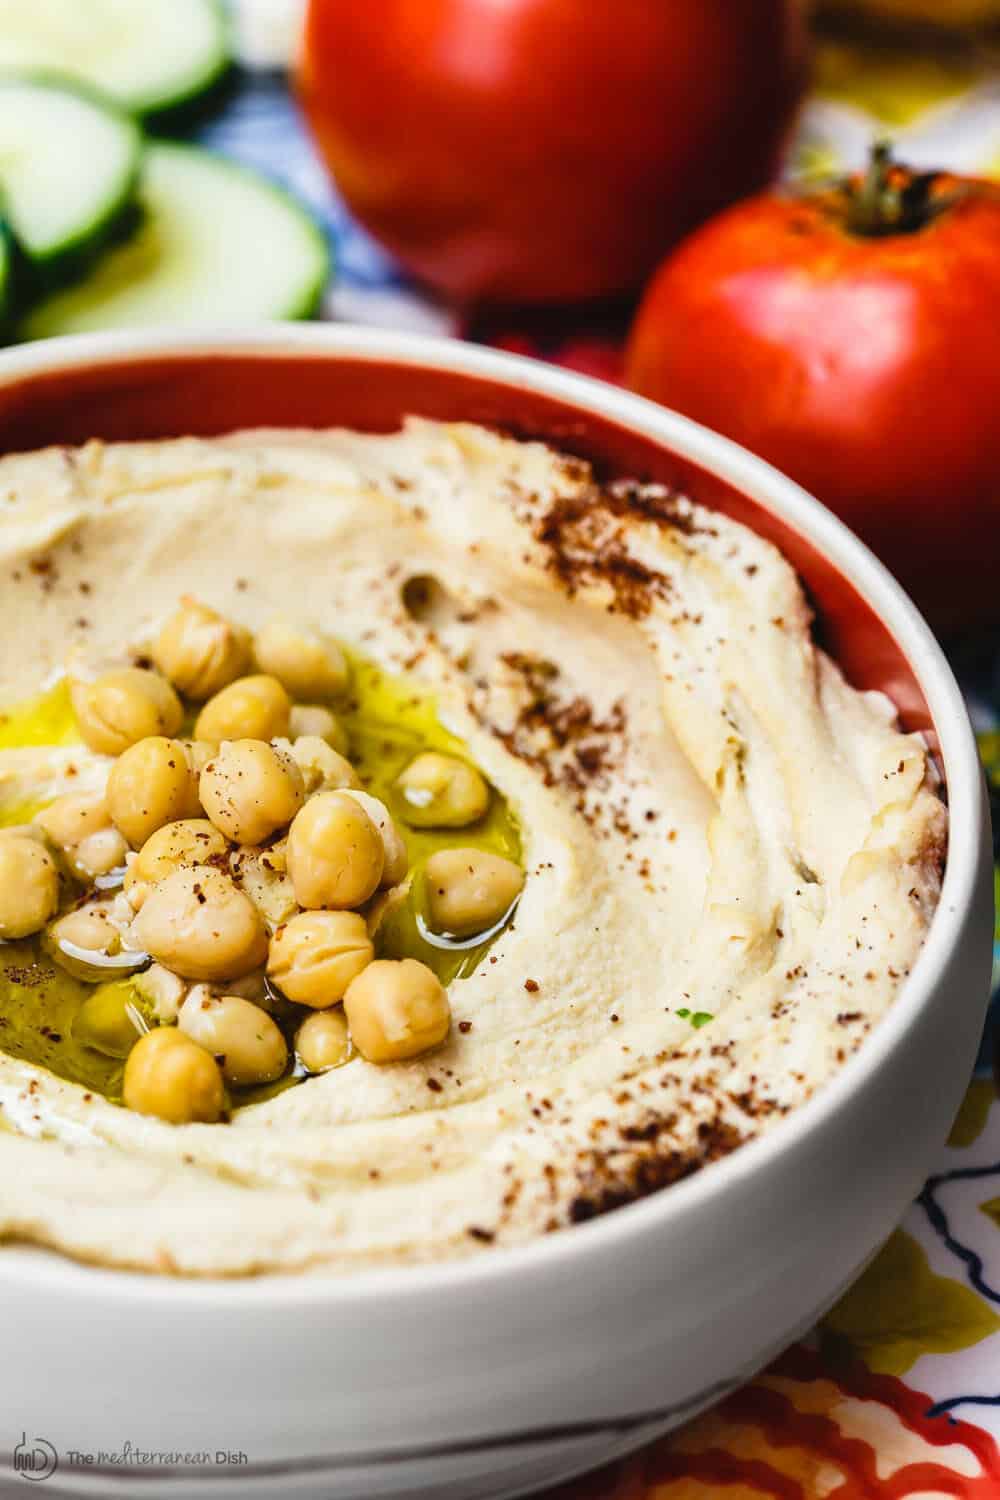 Easy Hummus Recipe (Authentic & Homemade from Scratch) | The Mediterranean Dish